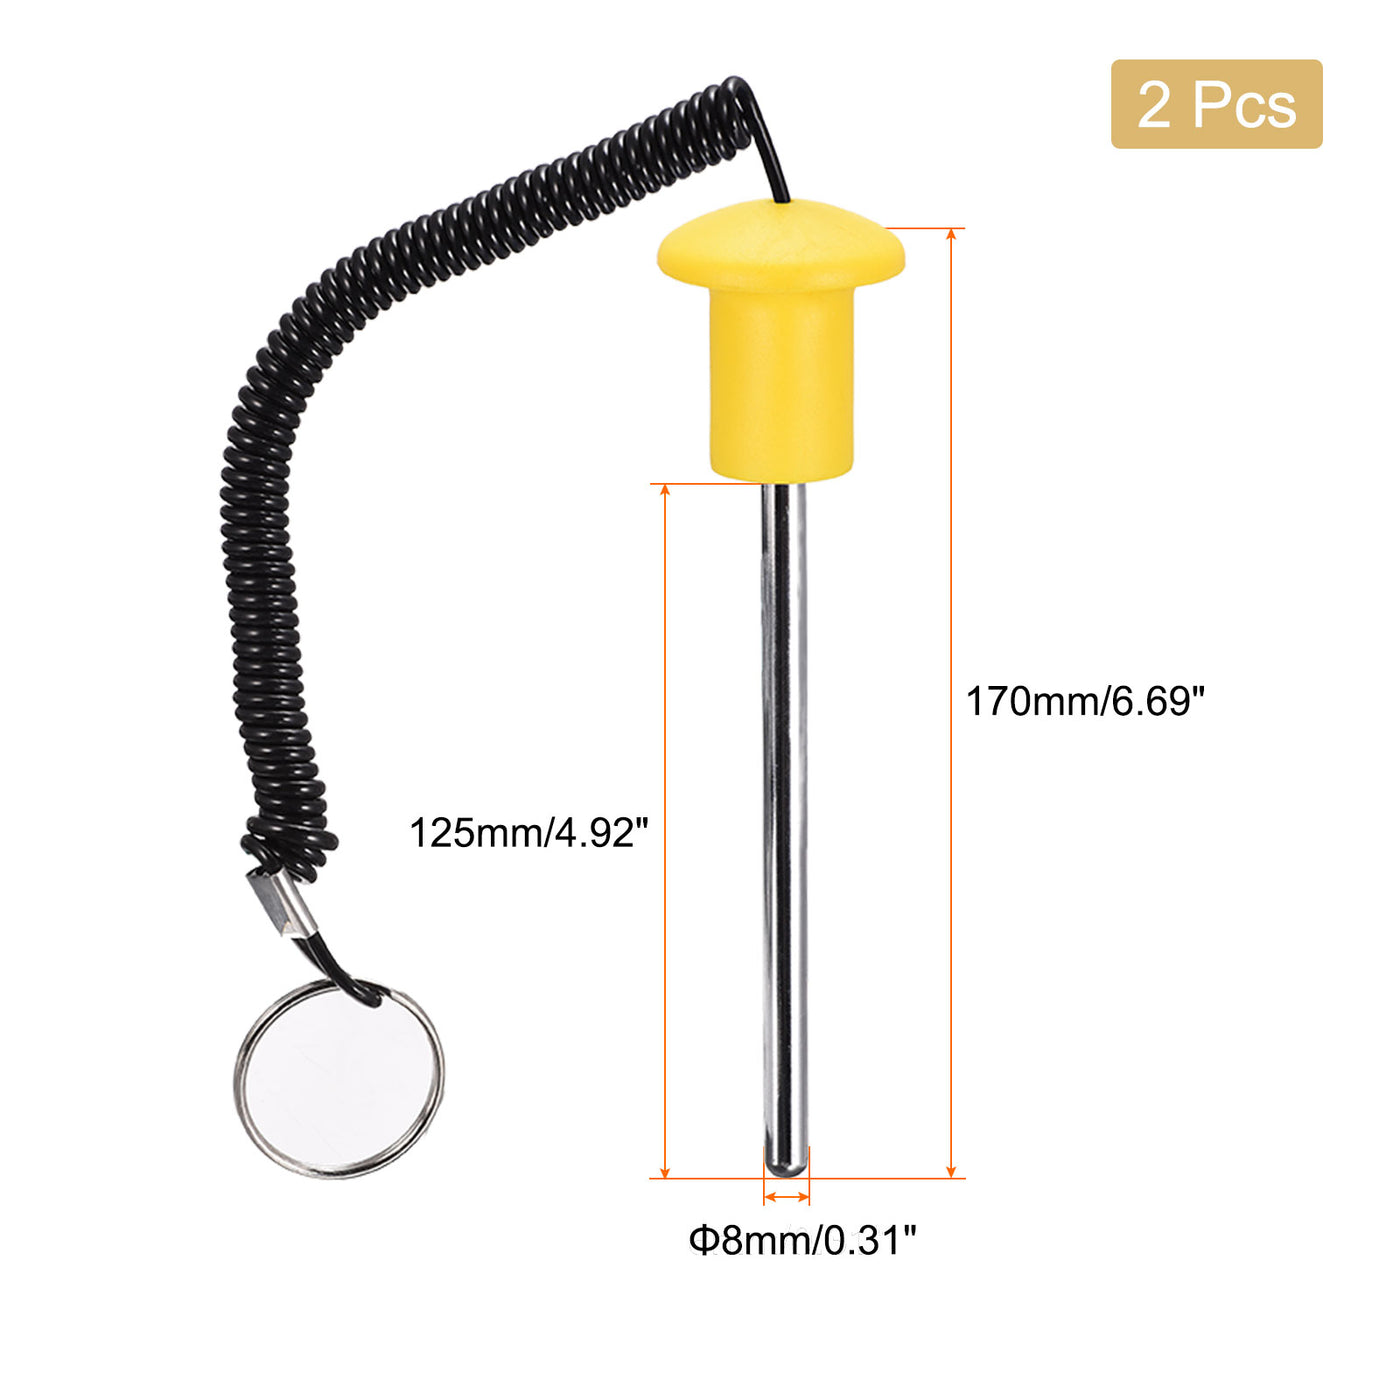 Uxcell Uxcell 10 x 80mm Weight Stack Pin with Pull Rope Magnetic Strength Training Yellow 2pcs